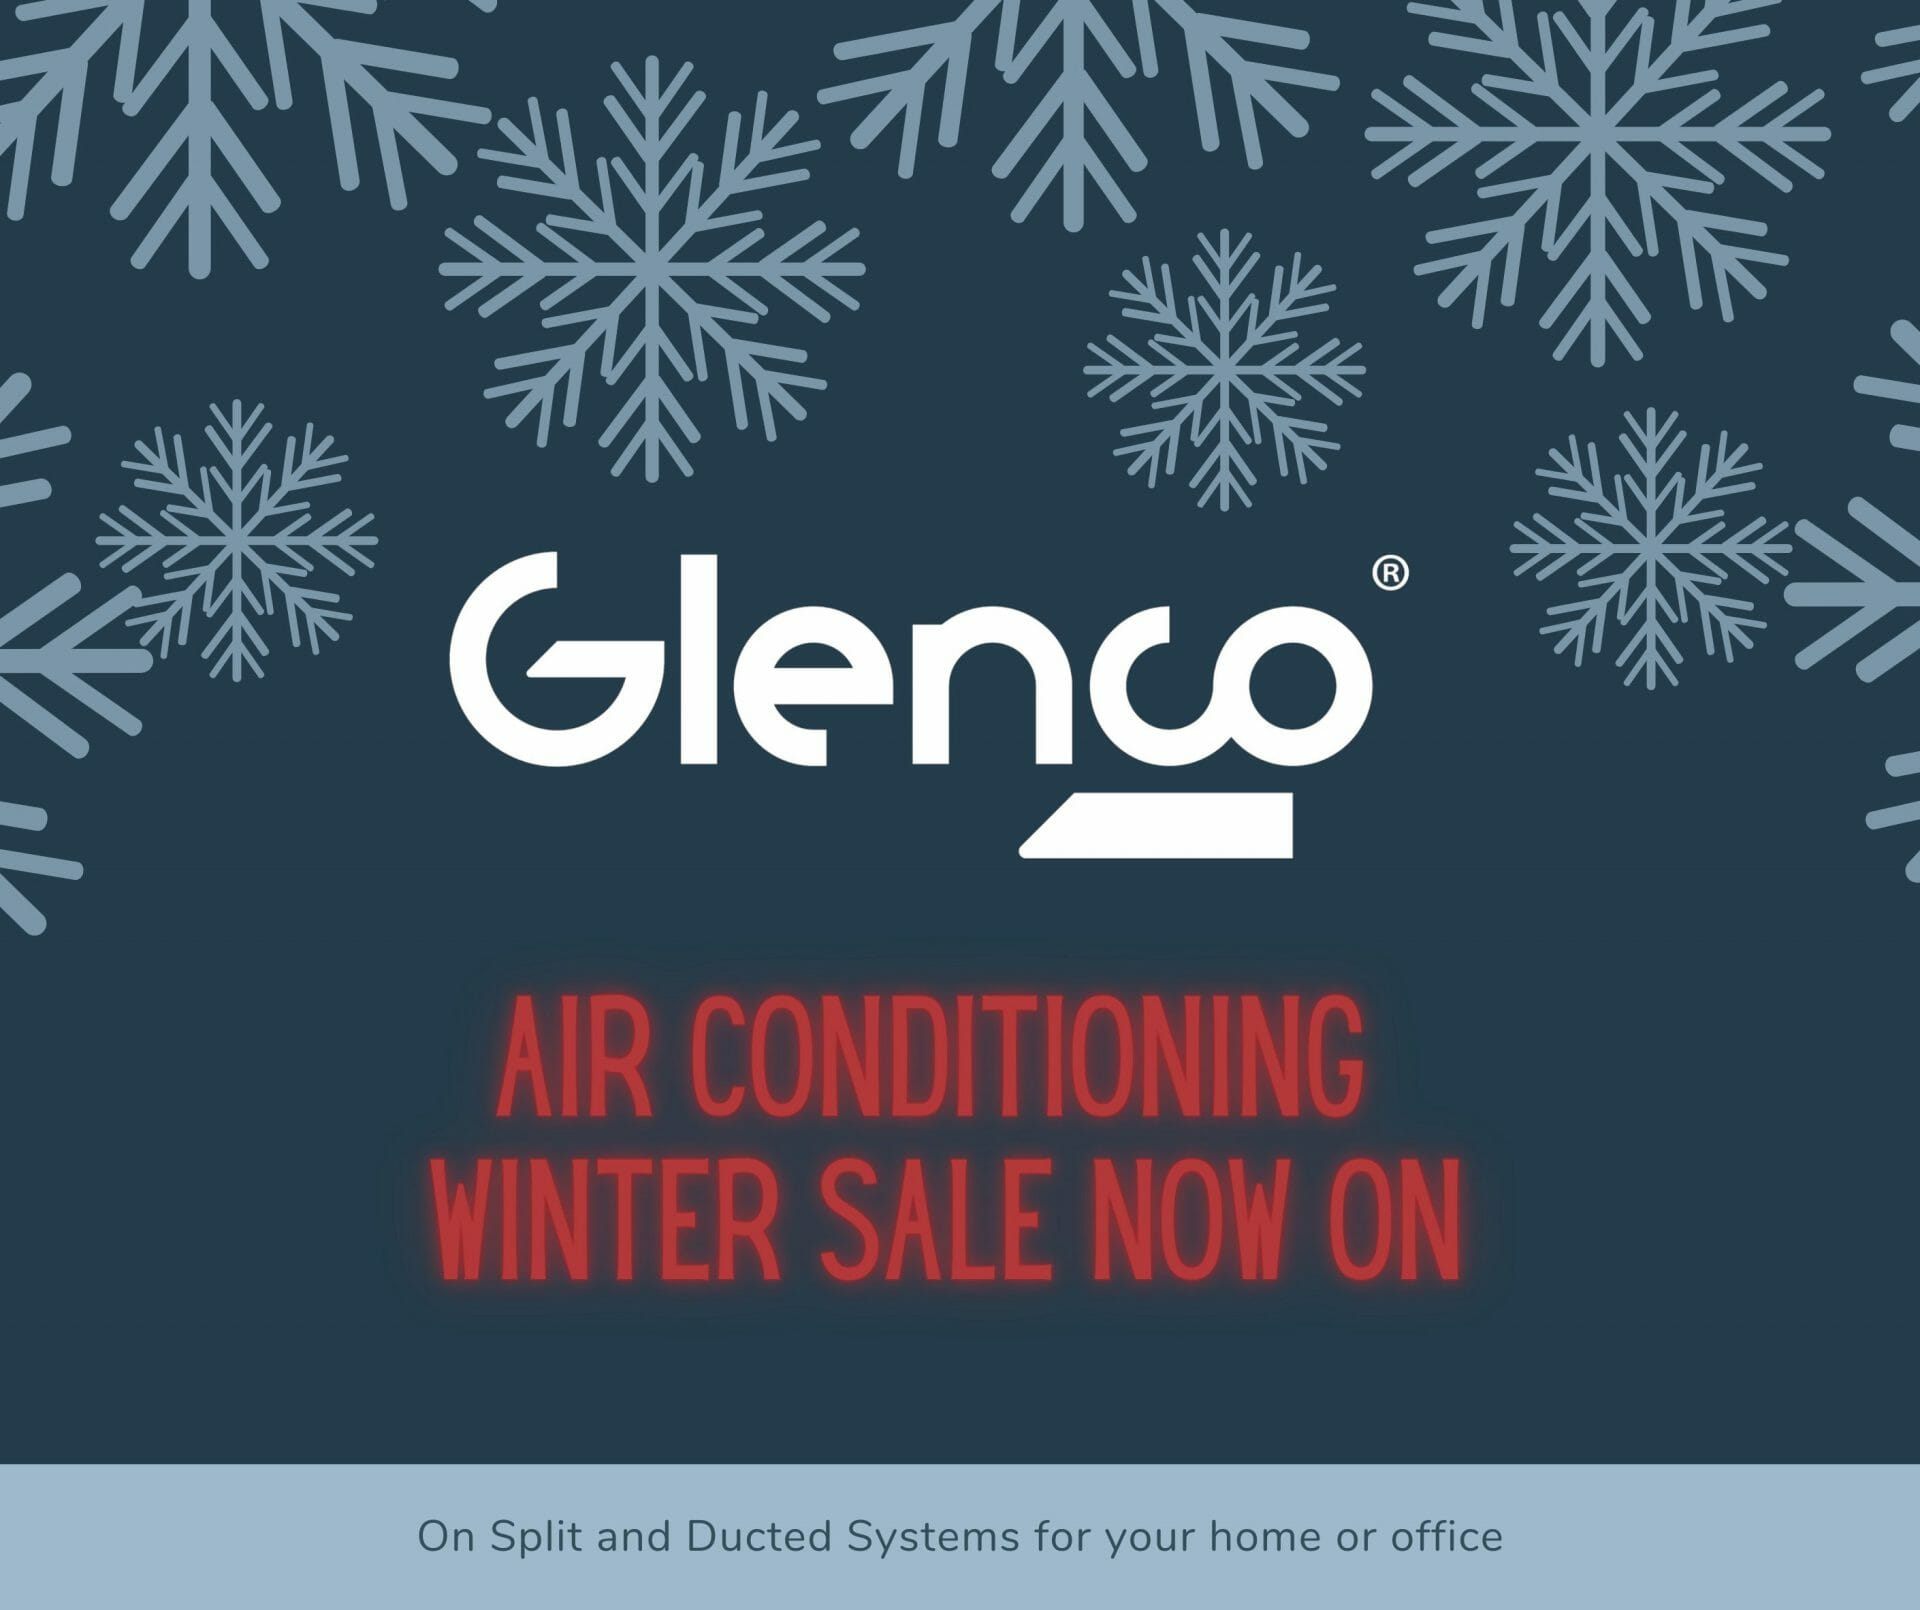 Air Conditioning Winter Sale